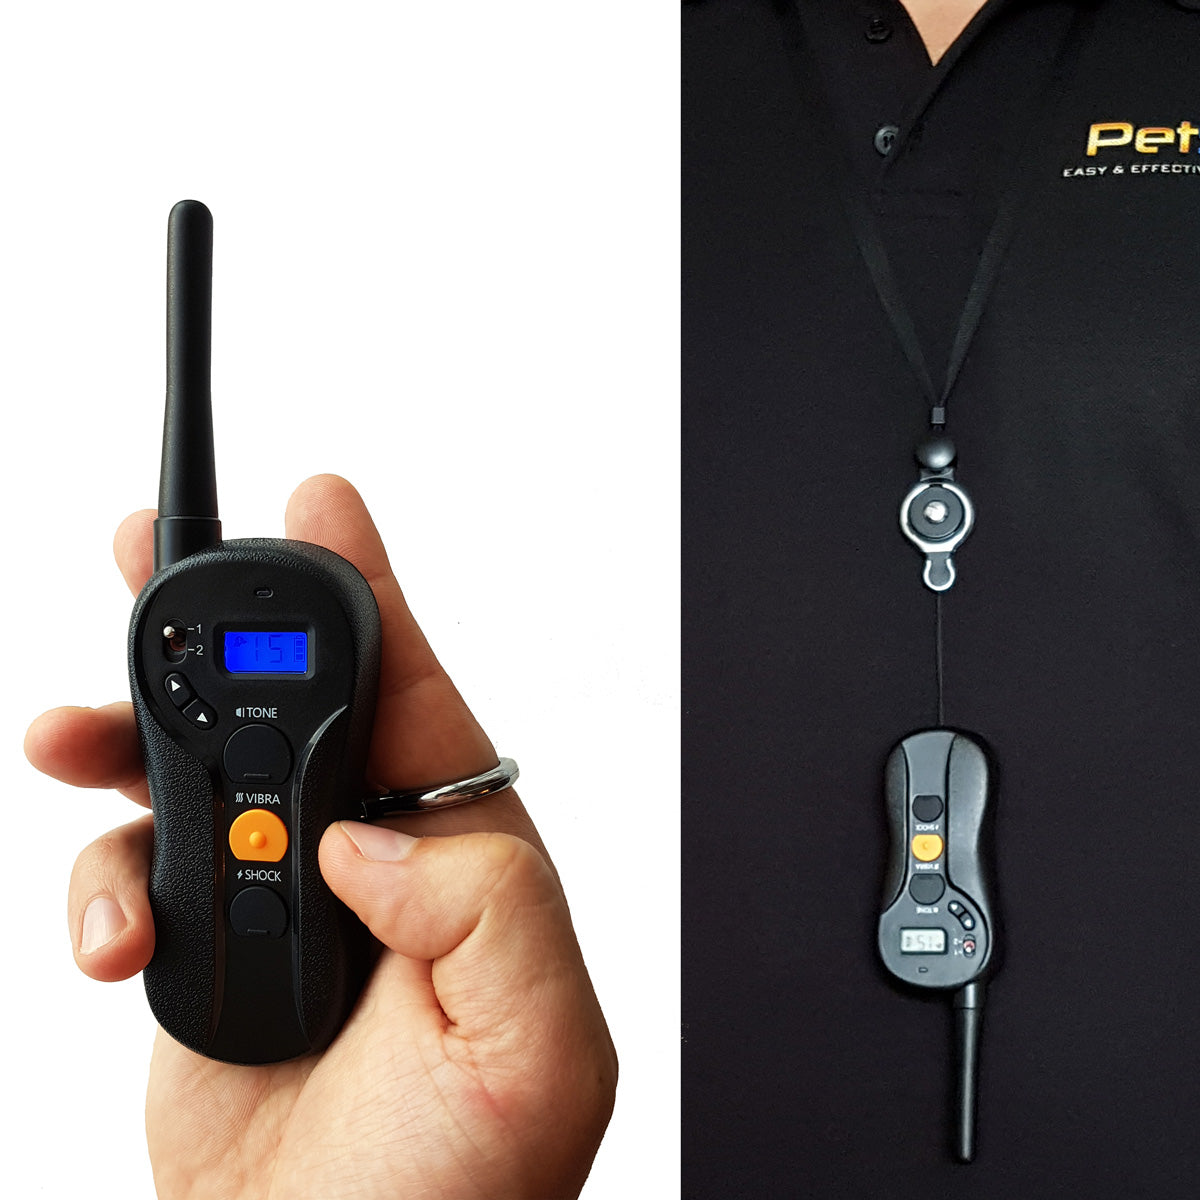 Lanyard for dog training remote transmitters. The soft material prevents irritation making it suitable for all-day use